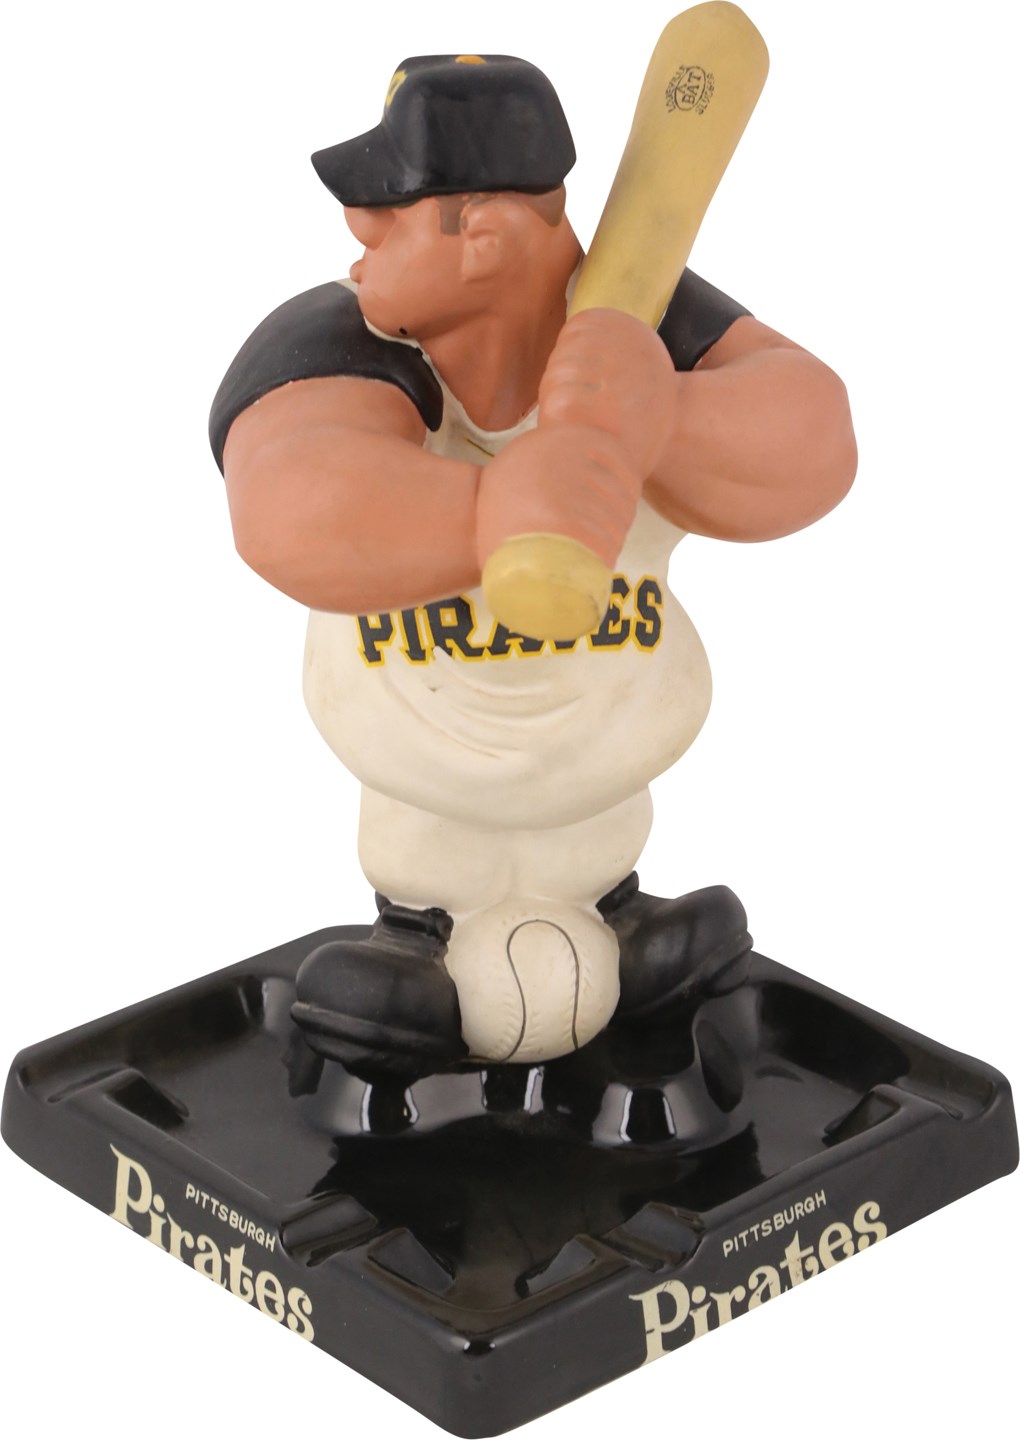 Clemente and Pittsburgh Pirates - Very Rare 1960s Pittsburgh Pirates Figural Ashtray by Fred Kail